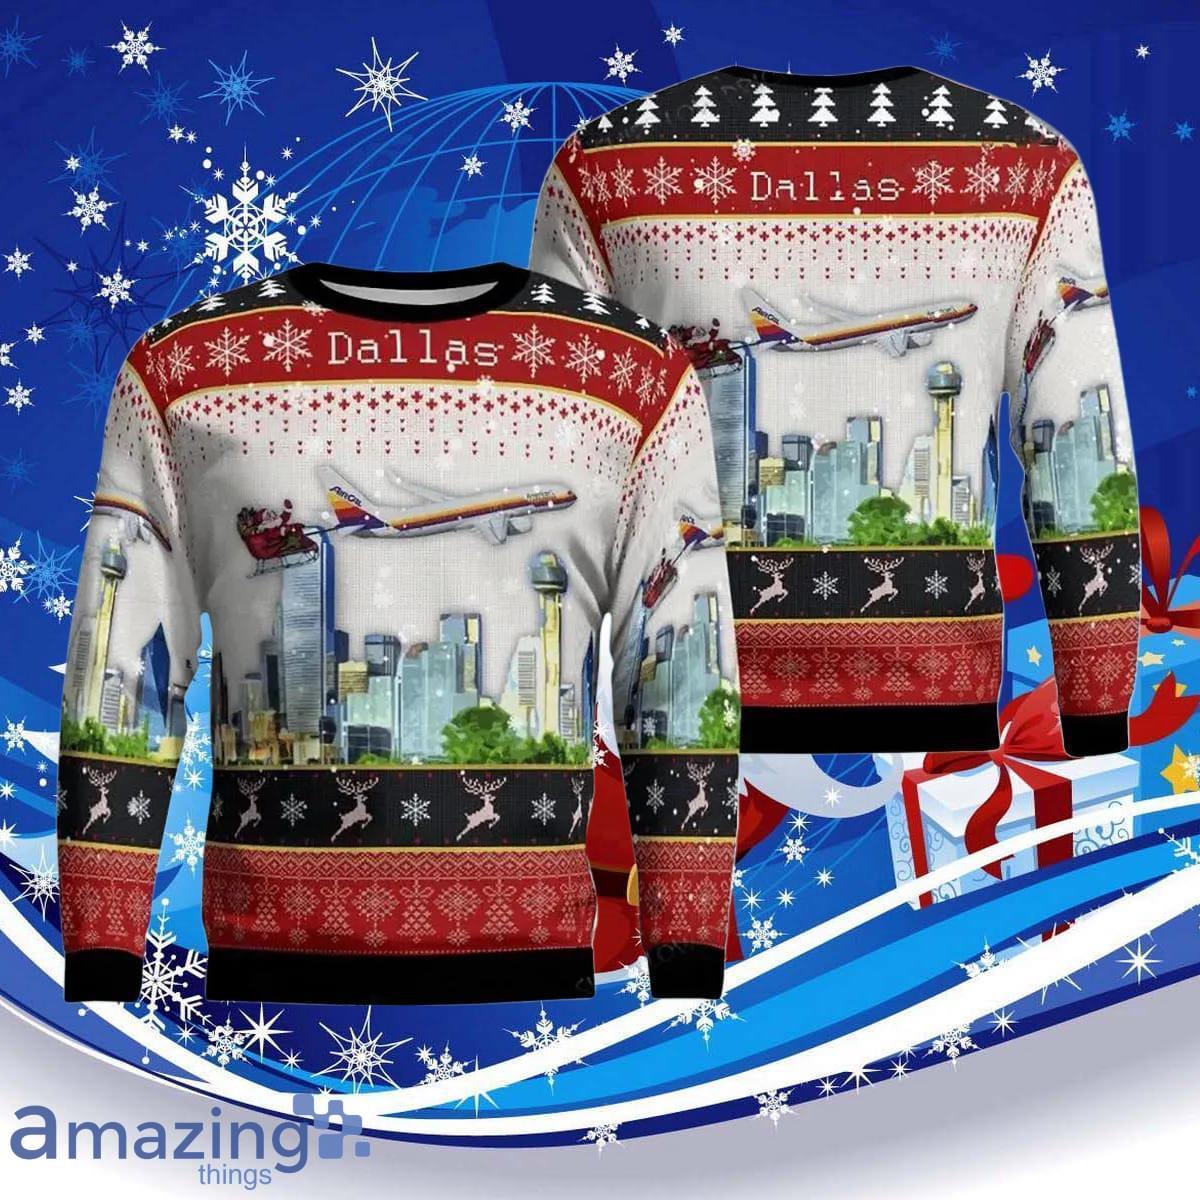 American Airlines Air Cal Heritage With Santa Over DallasUgly Christmas Sweater Special Gift For Men And Women Product Photo 1